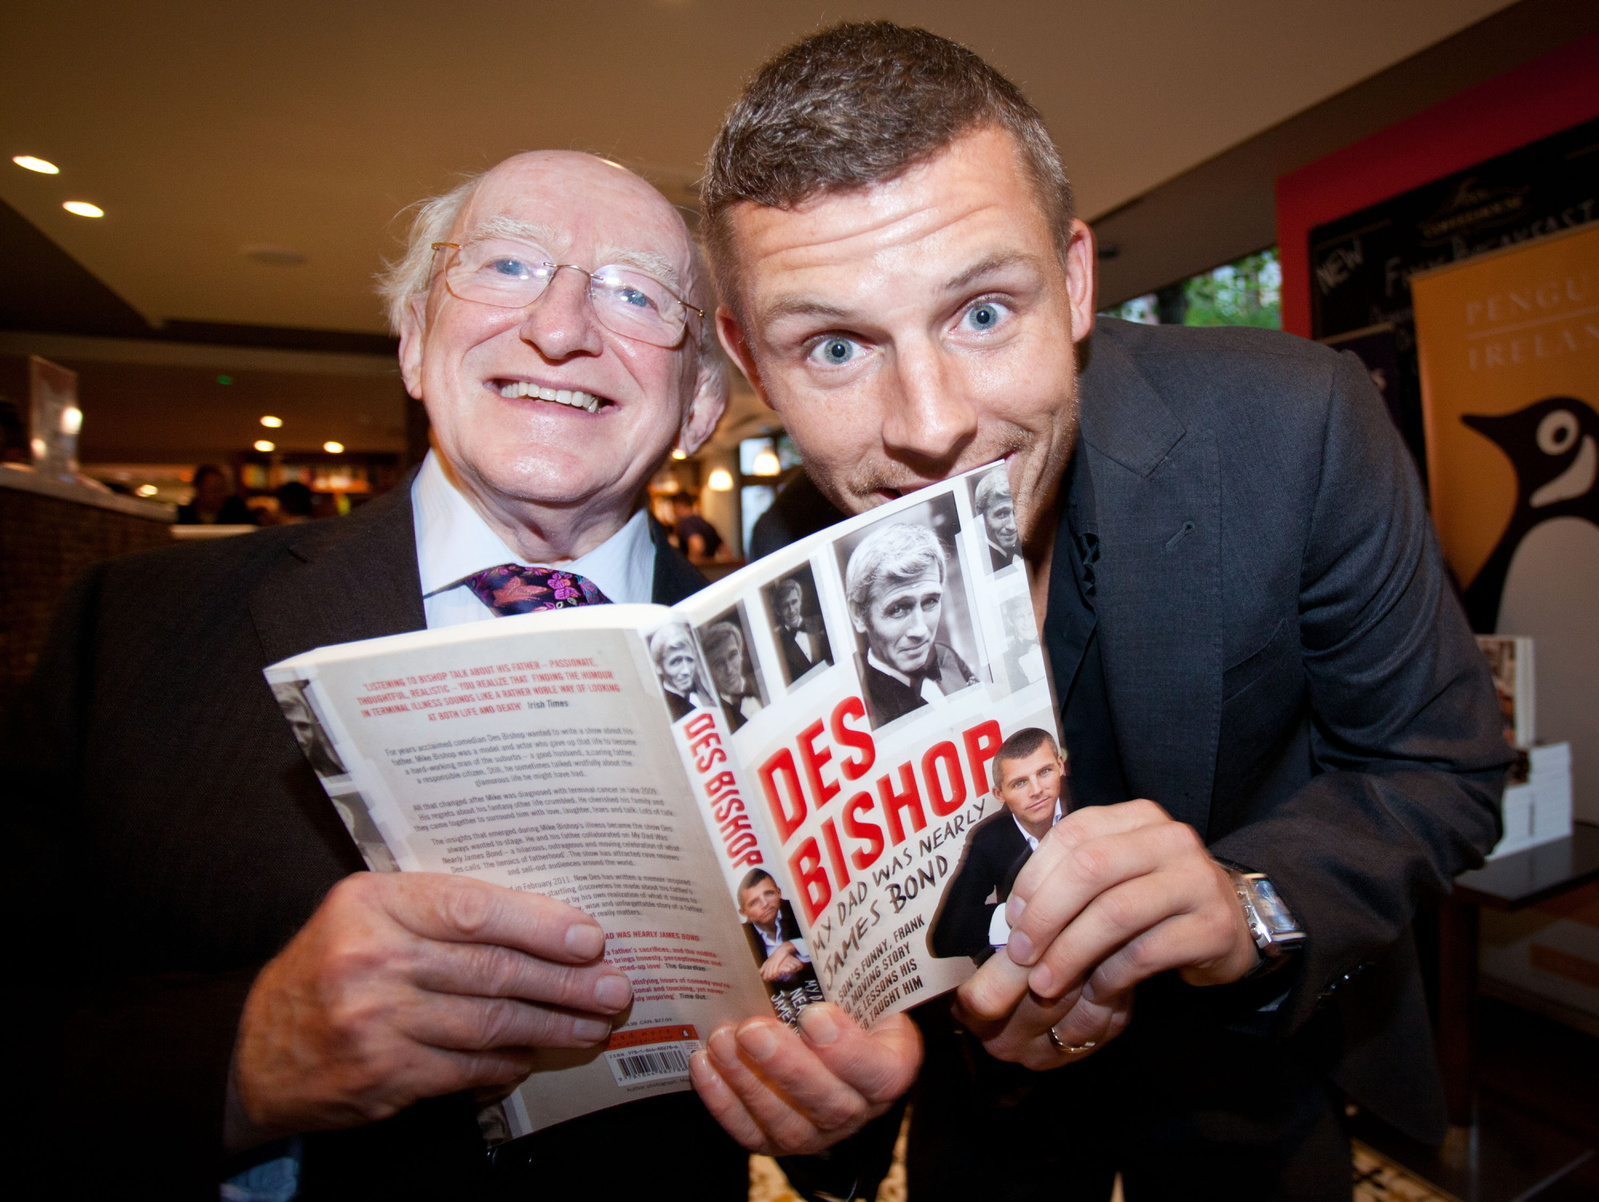 Press PR photo of President Michael D Higgins and Des Bishop at the photocall launch of Des Bishop's book 'My Dad was nearly James Bond'. Images syndicated onsite to National press media PR photographer Dublin